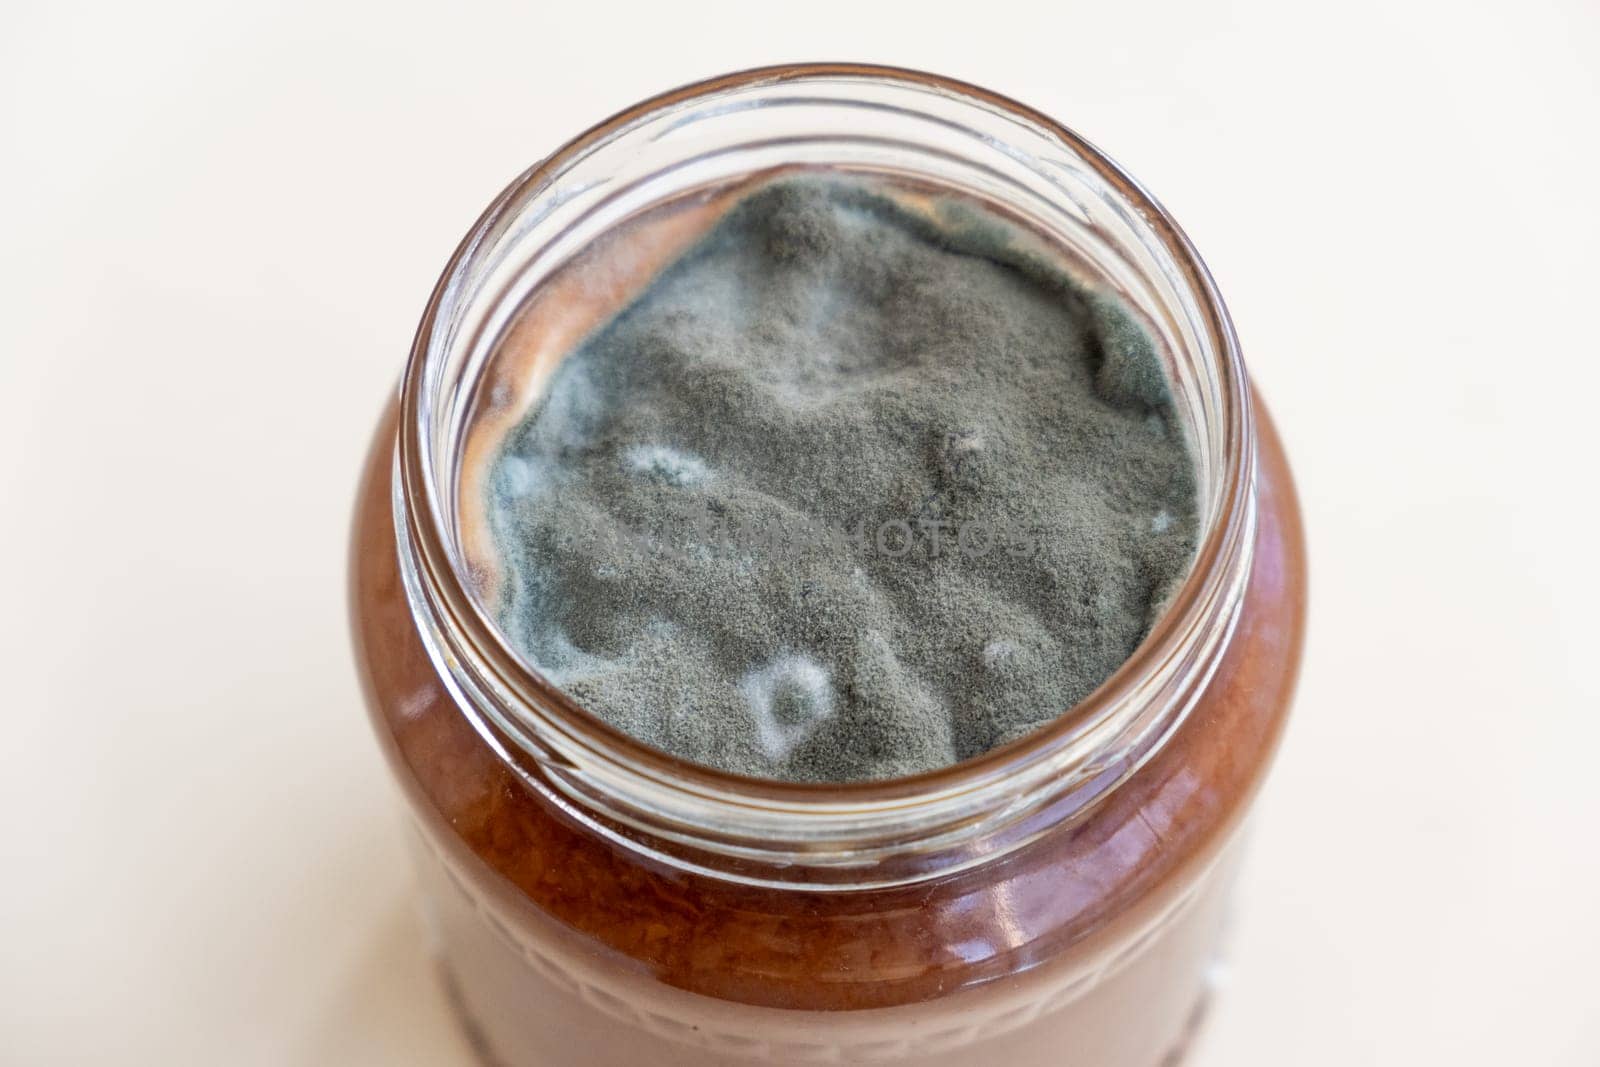 Open jar with sweet jam and mold on a white background. Mold in a jar of raspberry jam. Hazardous to health.